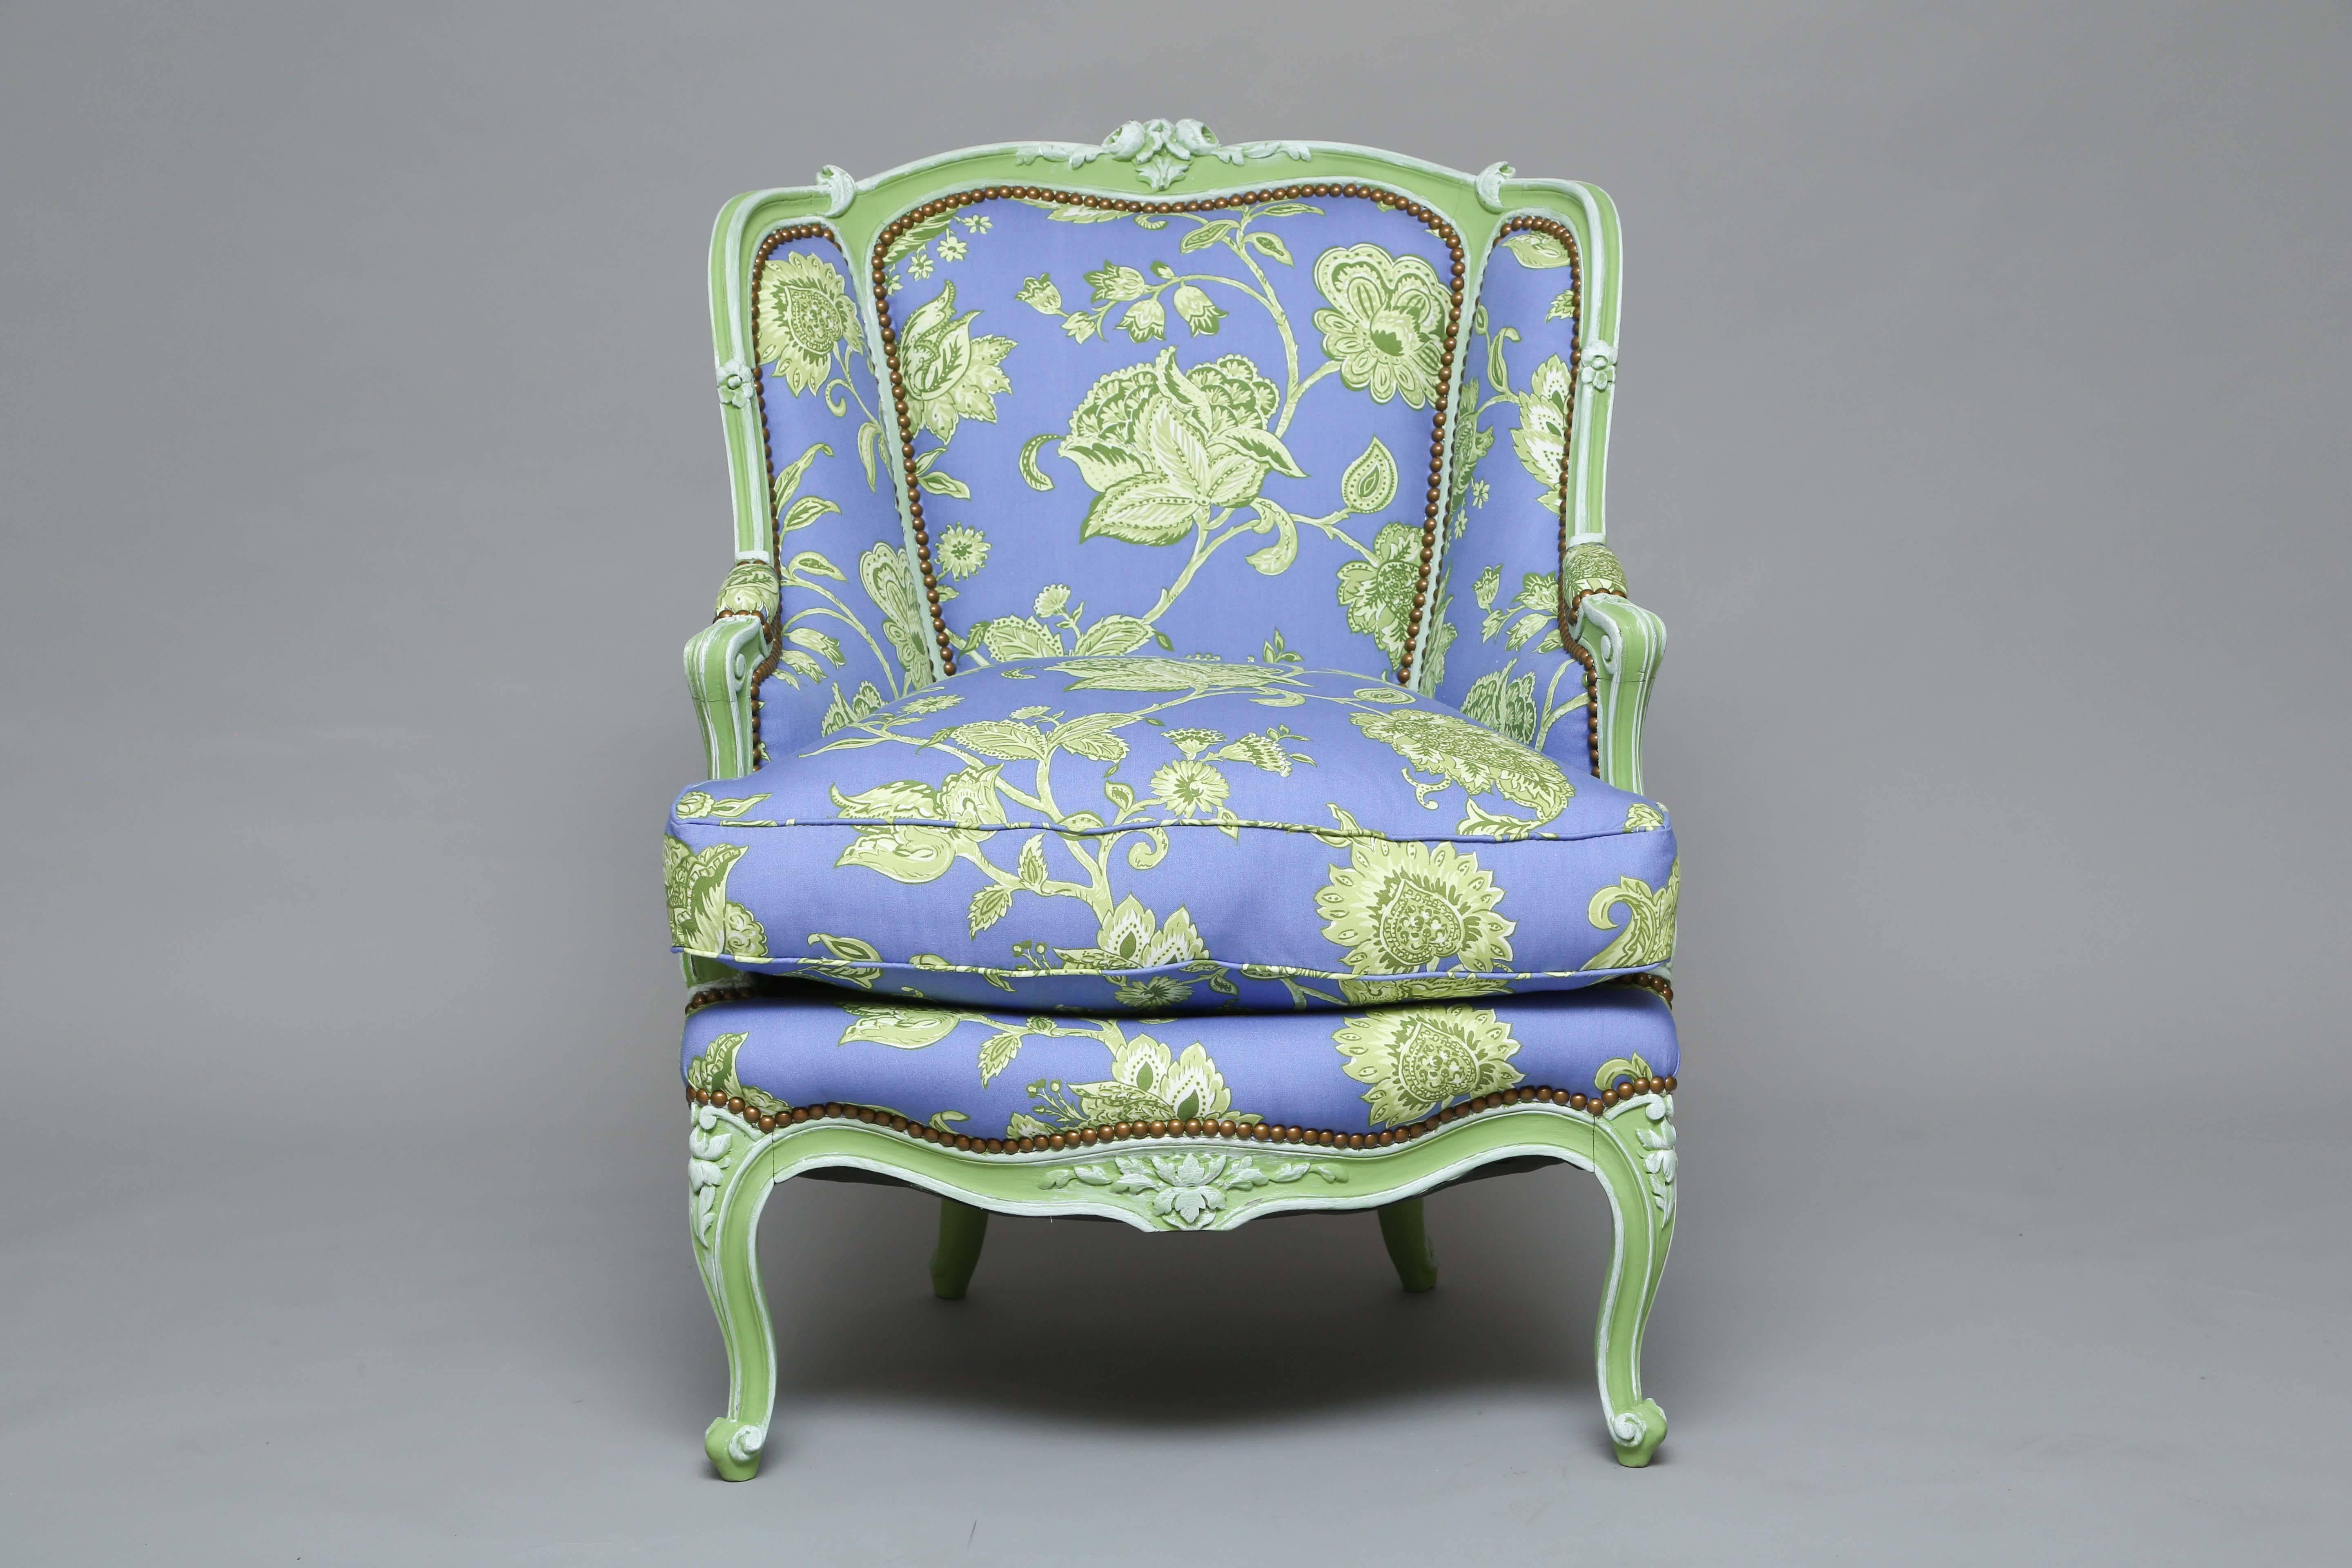 Pair of upholstered bergere armchairs, in the Louis XV style, each having a painted finish, with a shaped and domed padded back surmounted by a floral crest, joined to the cushioned seat by out scrolled acanthine-carved arms, the shaped